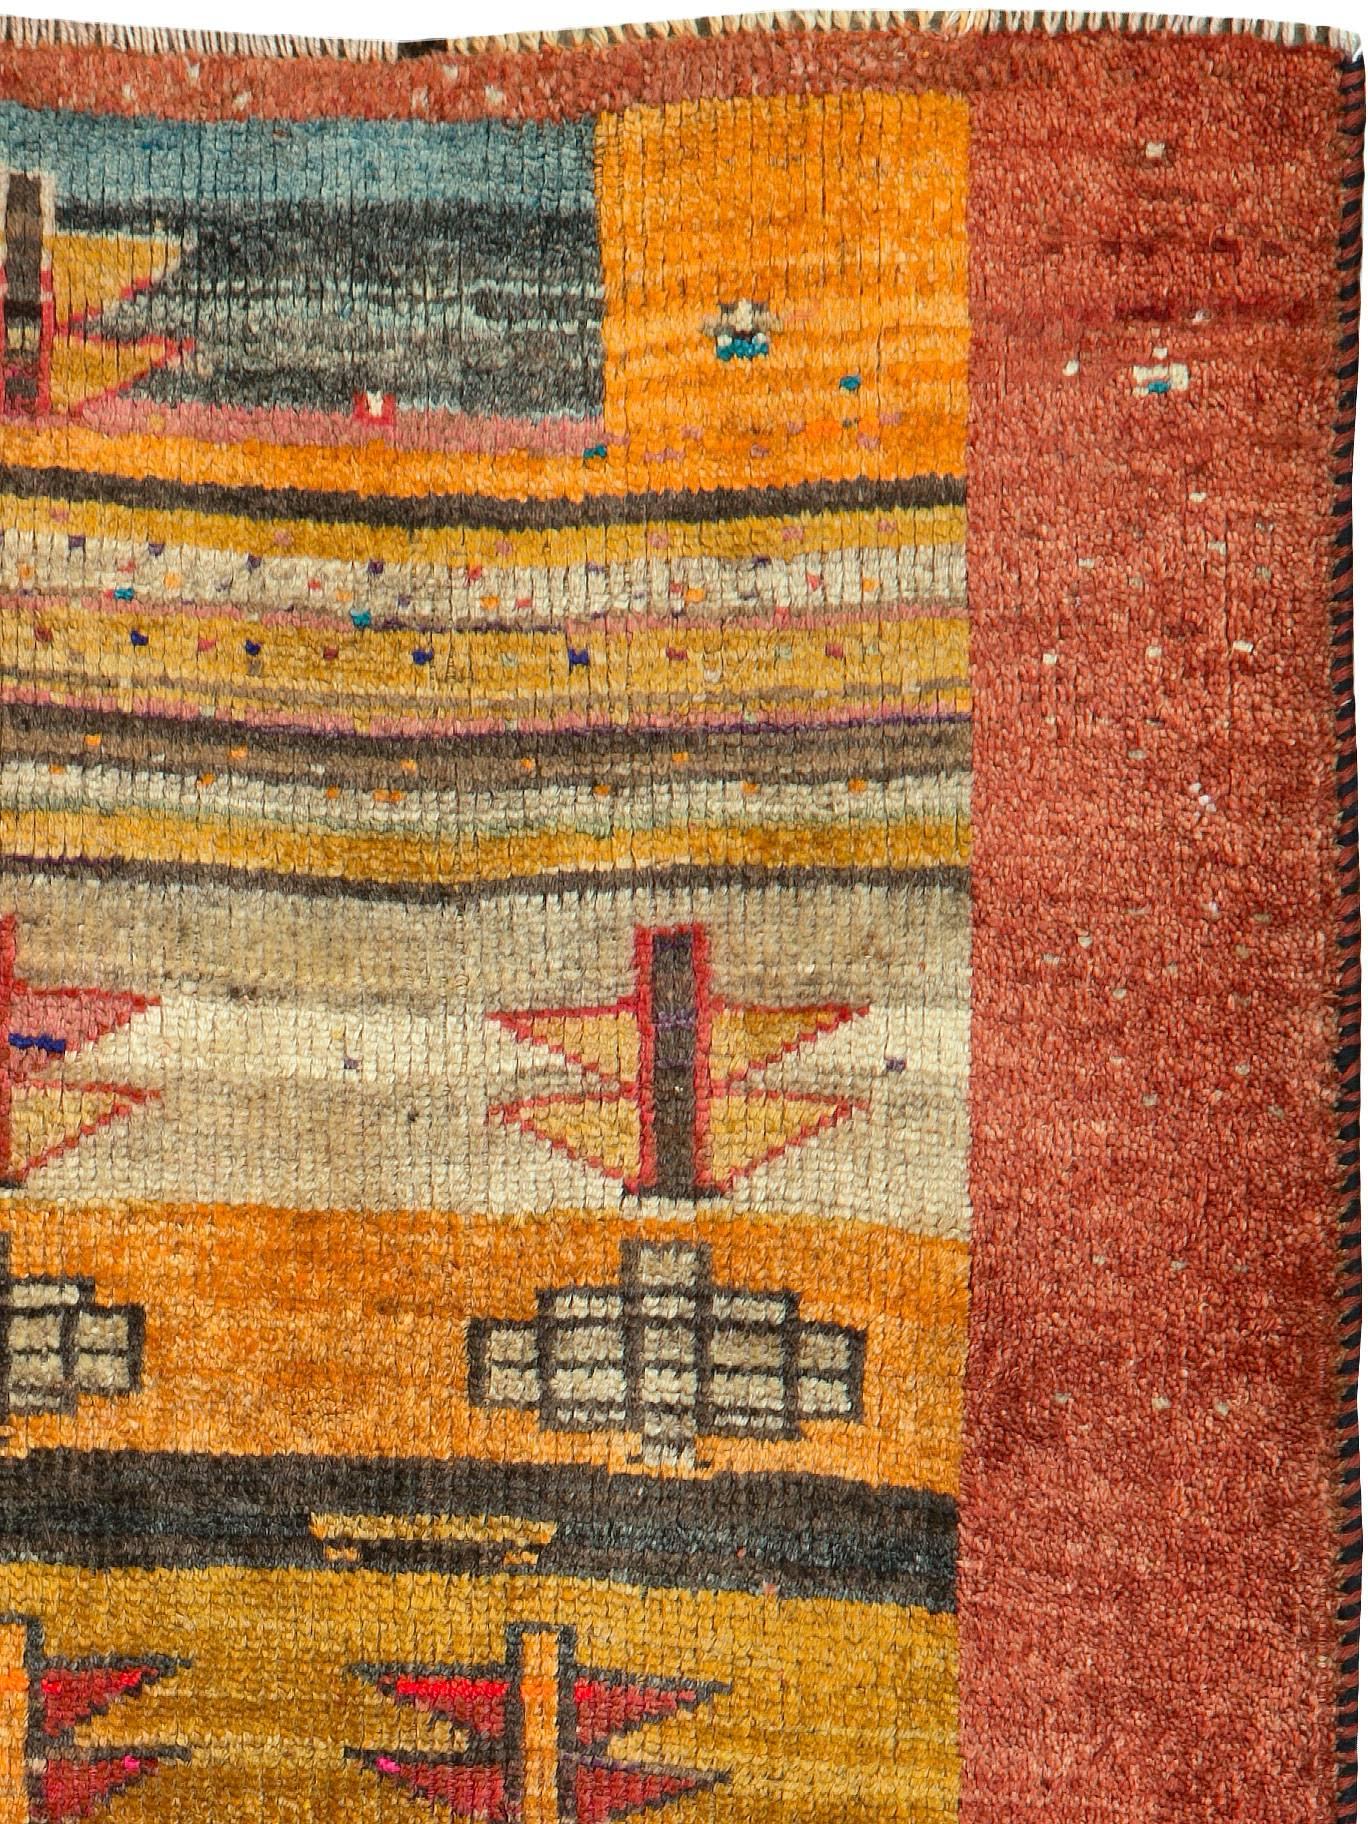 An antique Persian Gabbeh carpet from the second quarter of the 20th century.